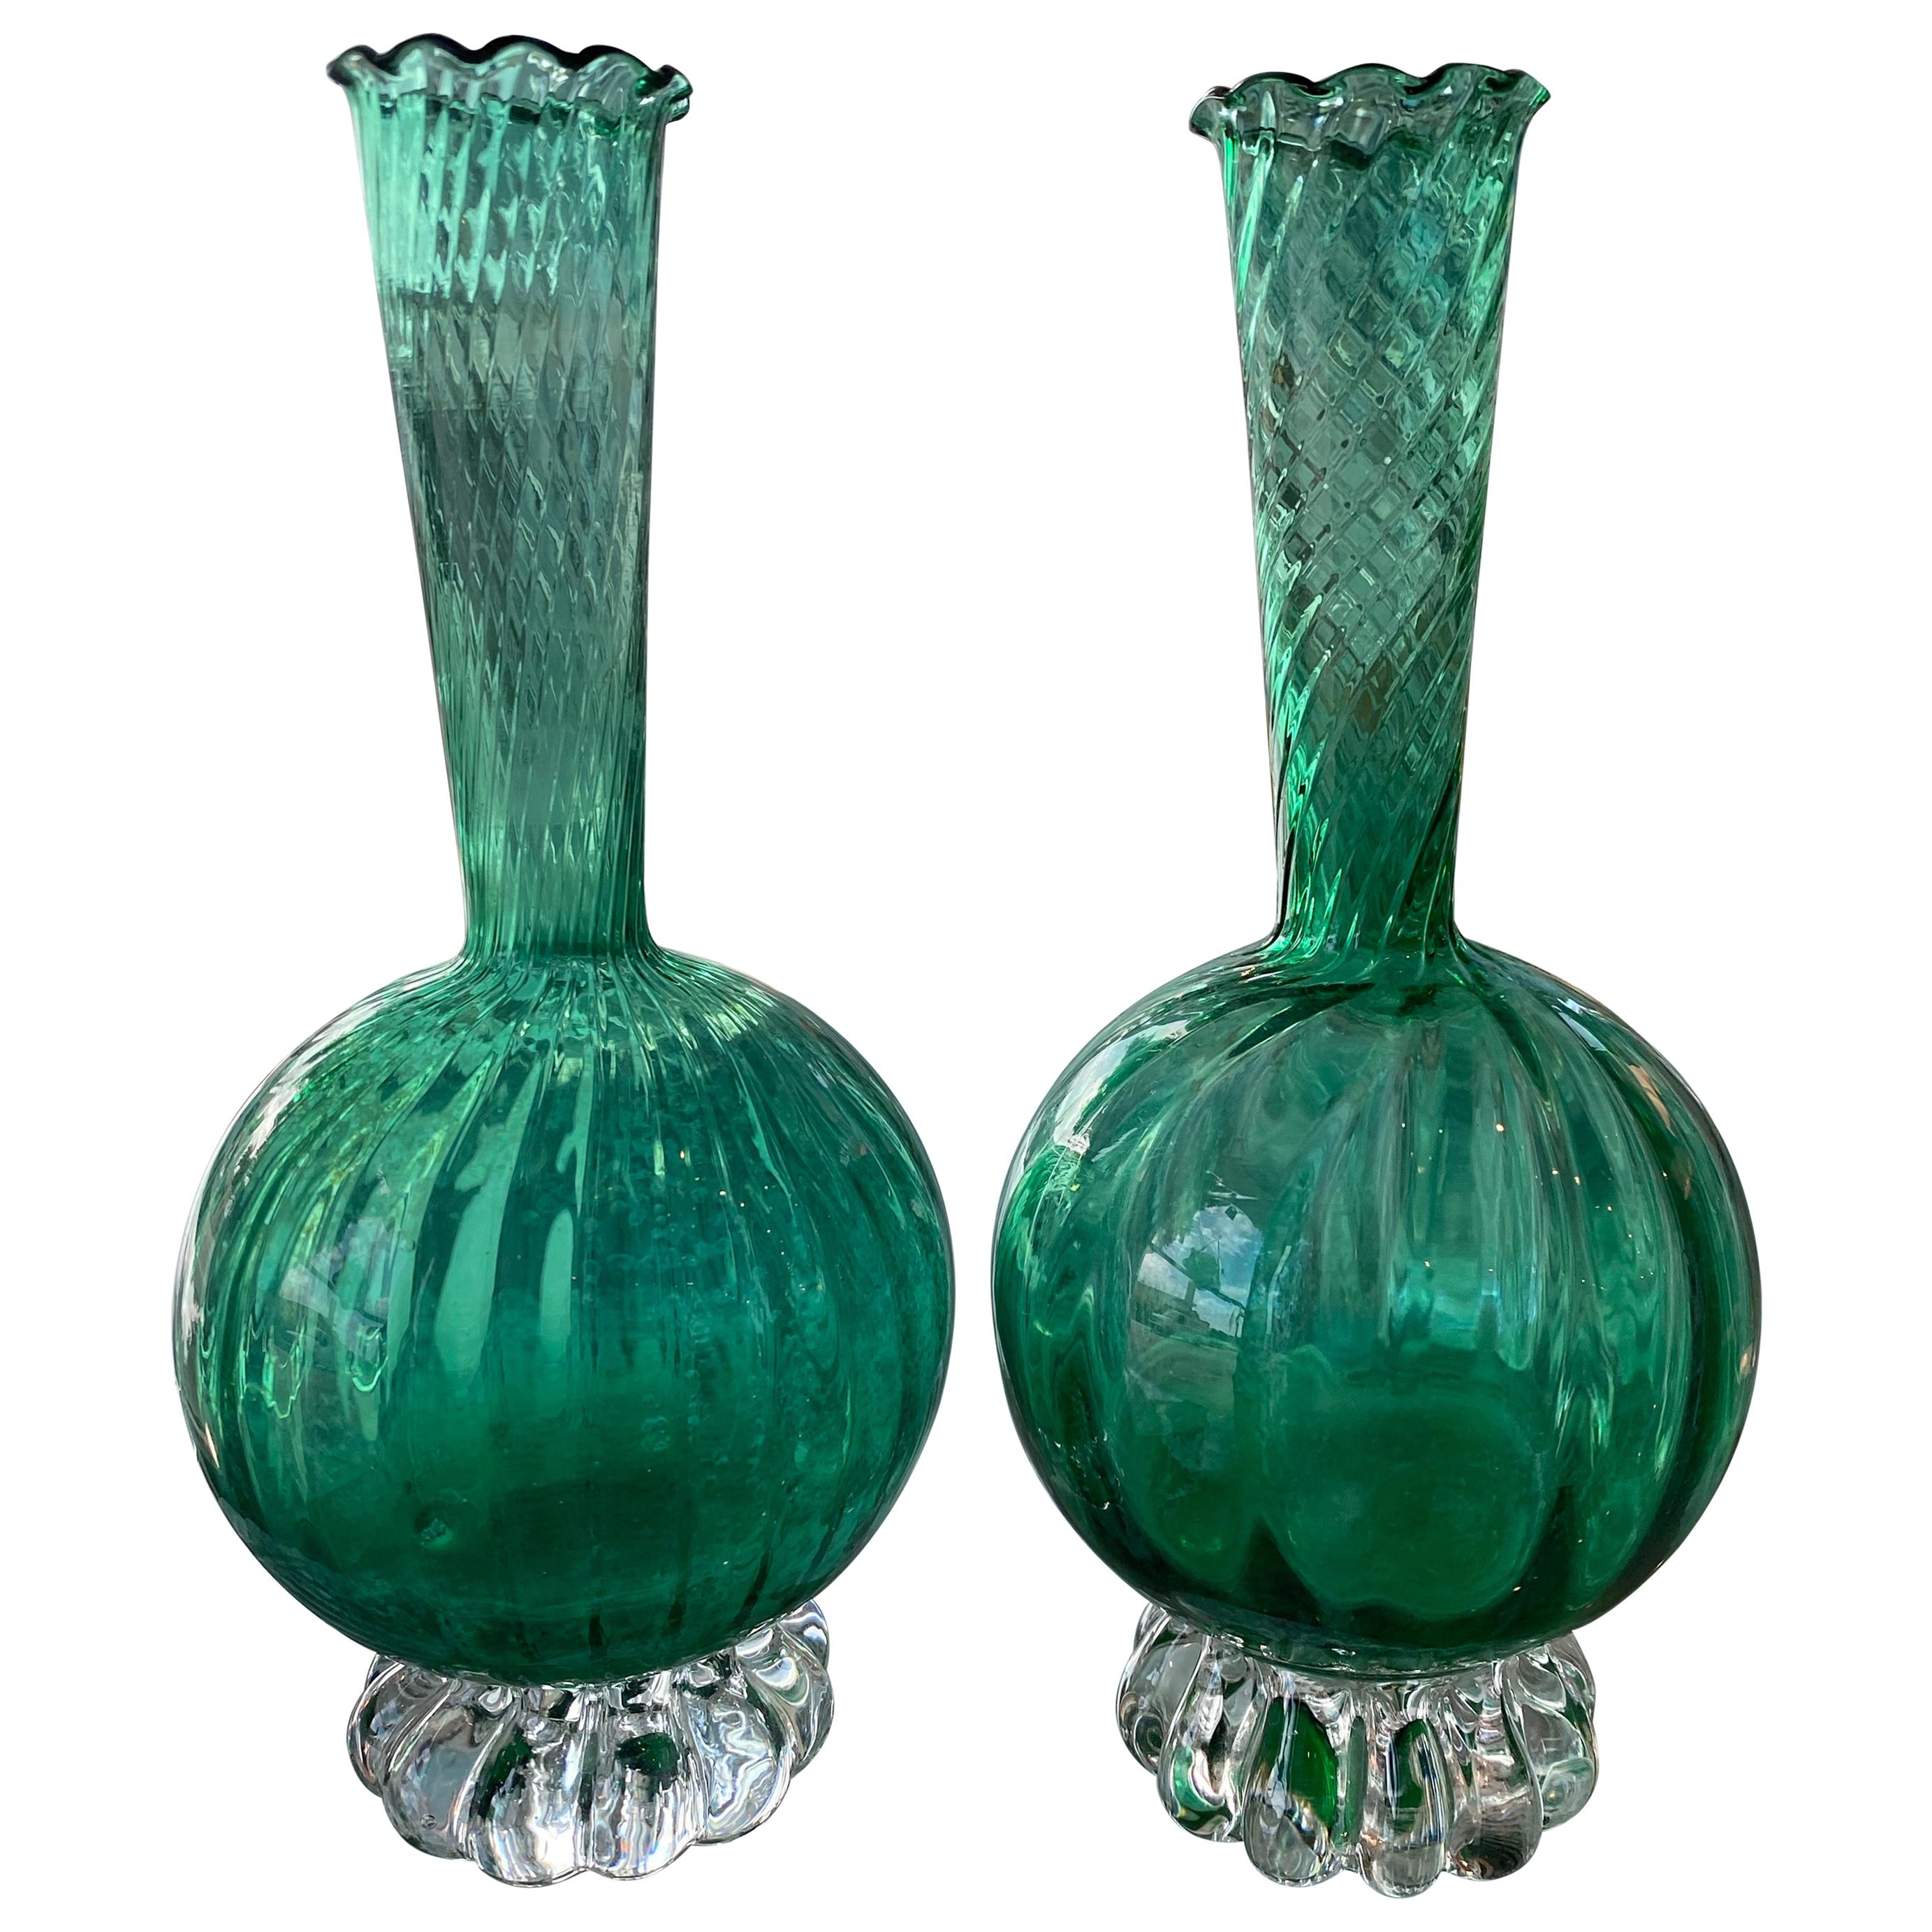 Vintage Pair of Murano Glass Emerald Green Bud Vases